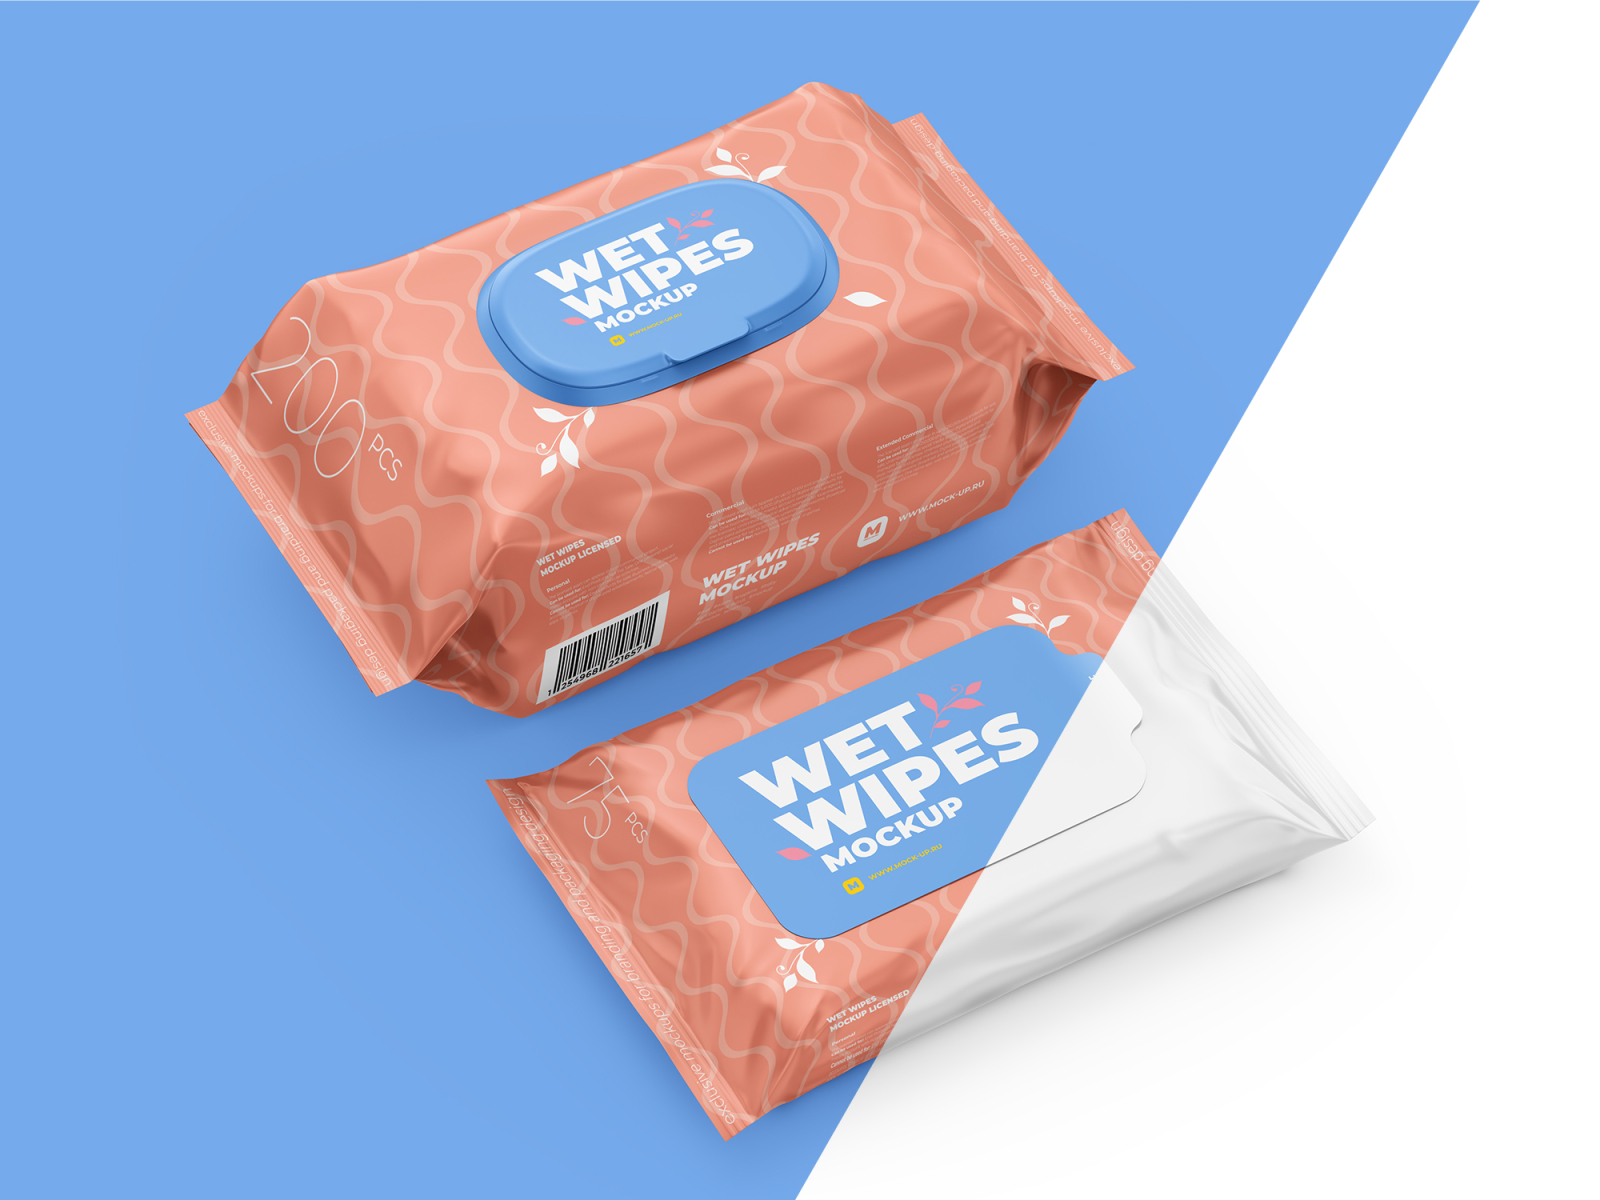 Wet Wipes Mockup, large and small packaging by Aleksey ...